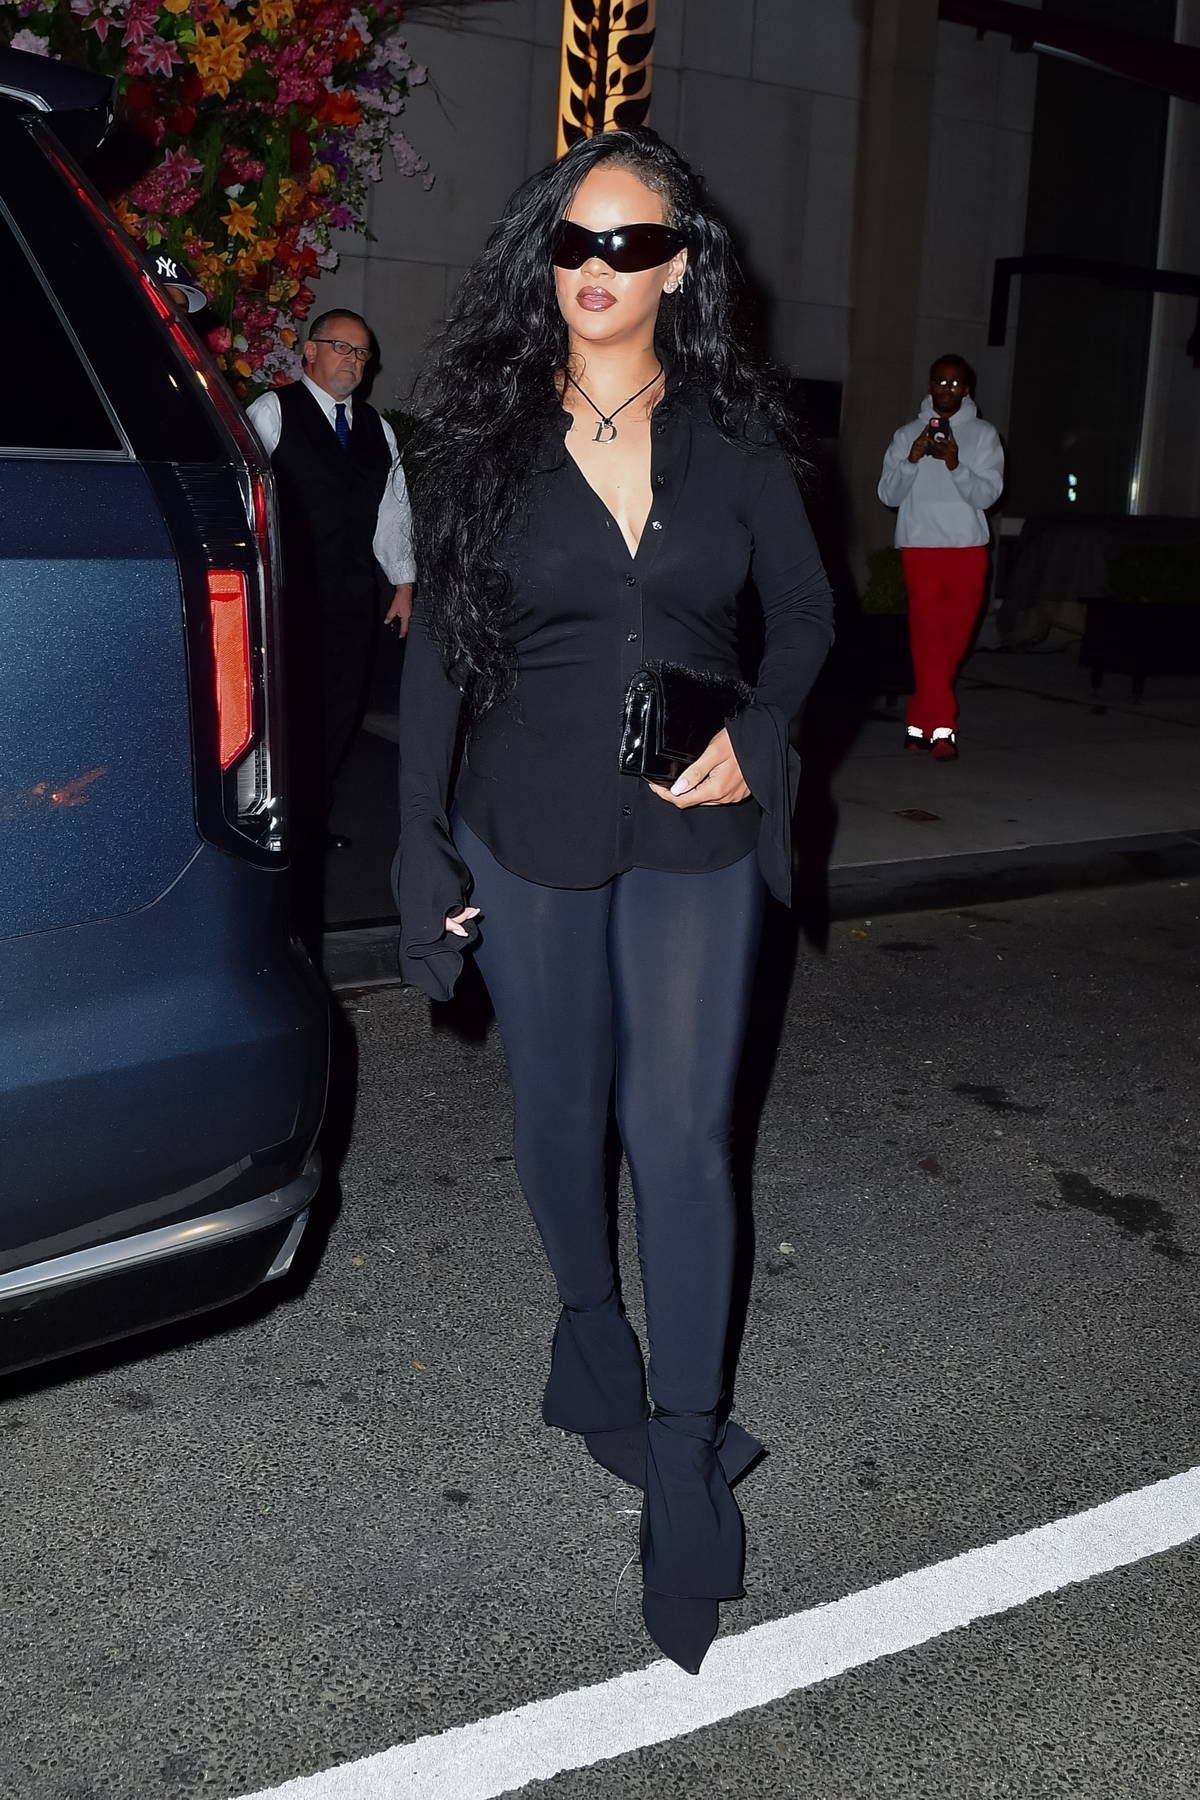 https://www.celebsfirst.com/wp-content/uploads/2022/11/rihanna-looks-stunning-a-black-shirt-with-matching-leggings-and-heels-while-stepping-out-for-dinner-in-new-york-city-051122_7.jpg